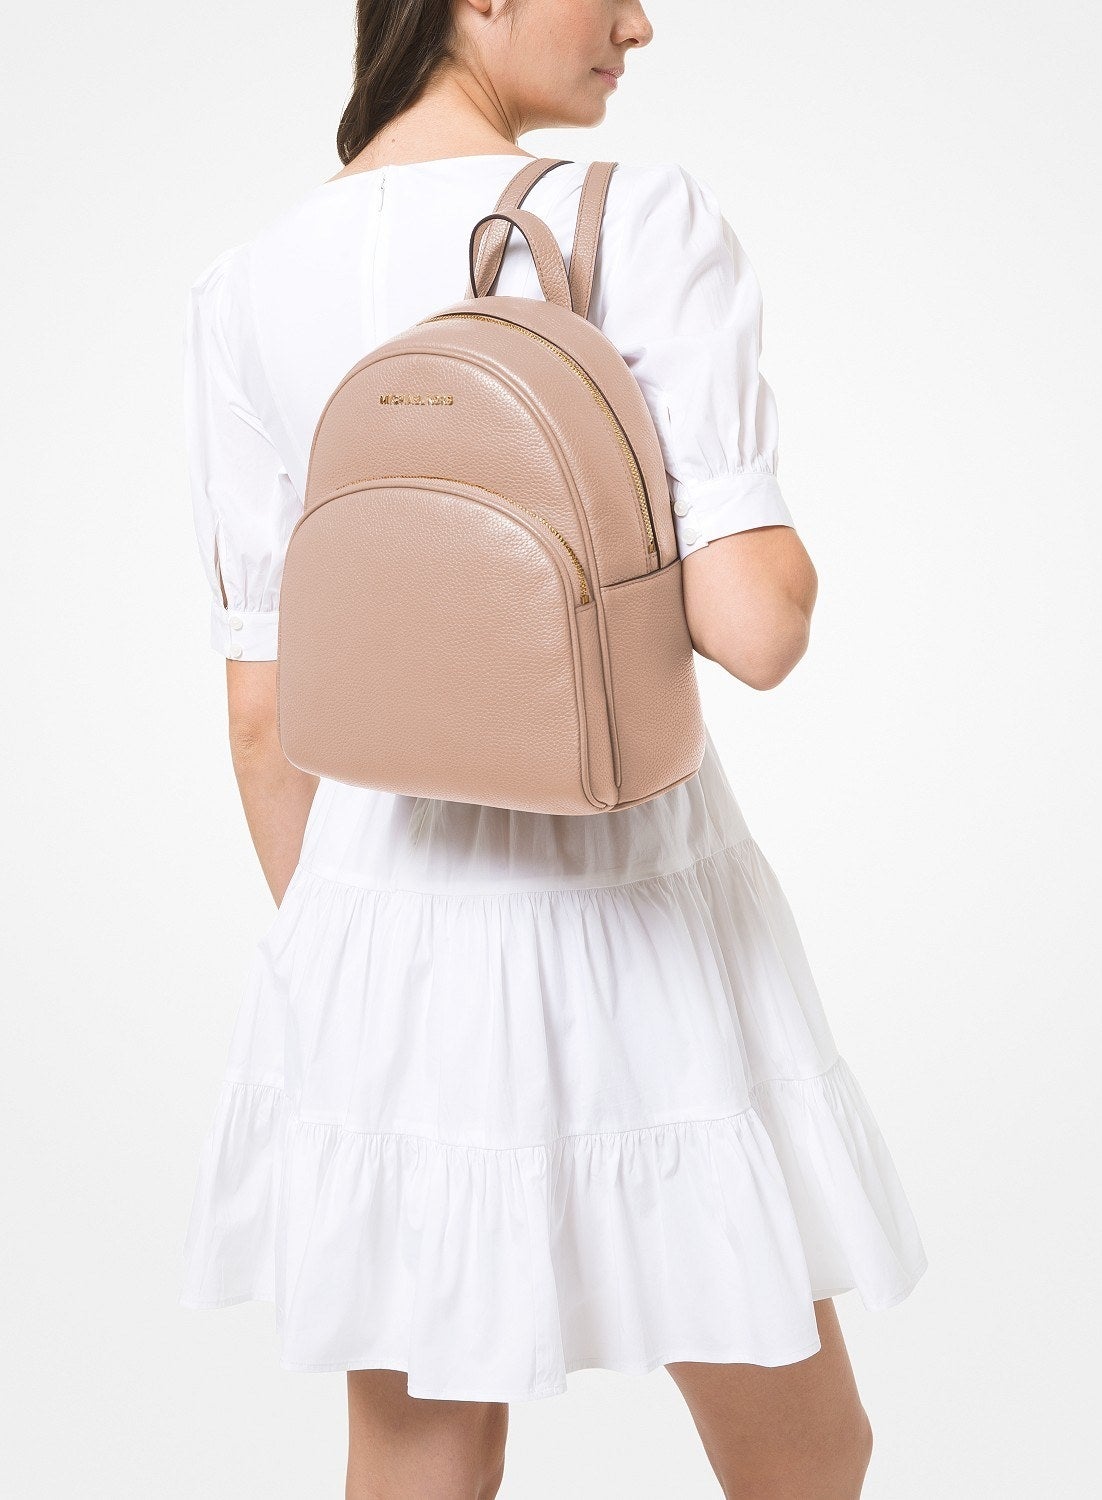 model wearing the backpack